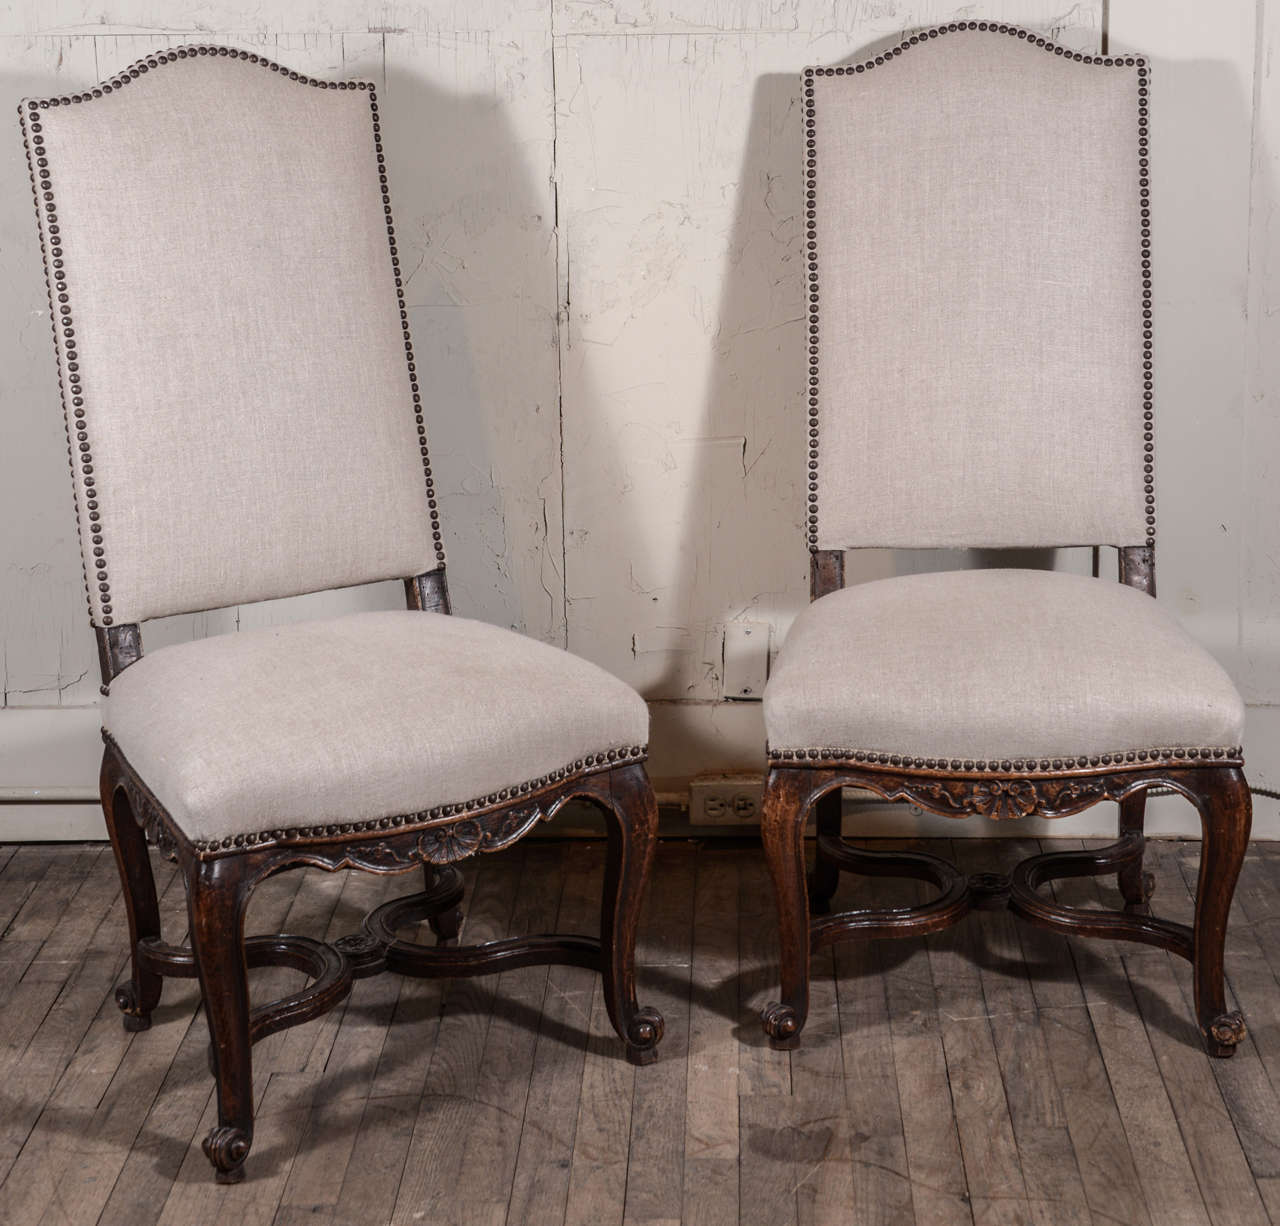 Pair of Regence side chairs hand carved in oak, mid-19th century, France. Adorned by carved rocaille (shell and sinuous foliate forms) motifs. Each seat is framed by a shaped apron atop four cabriole legs, supported by a curved cross stretcher